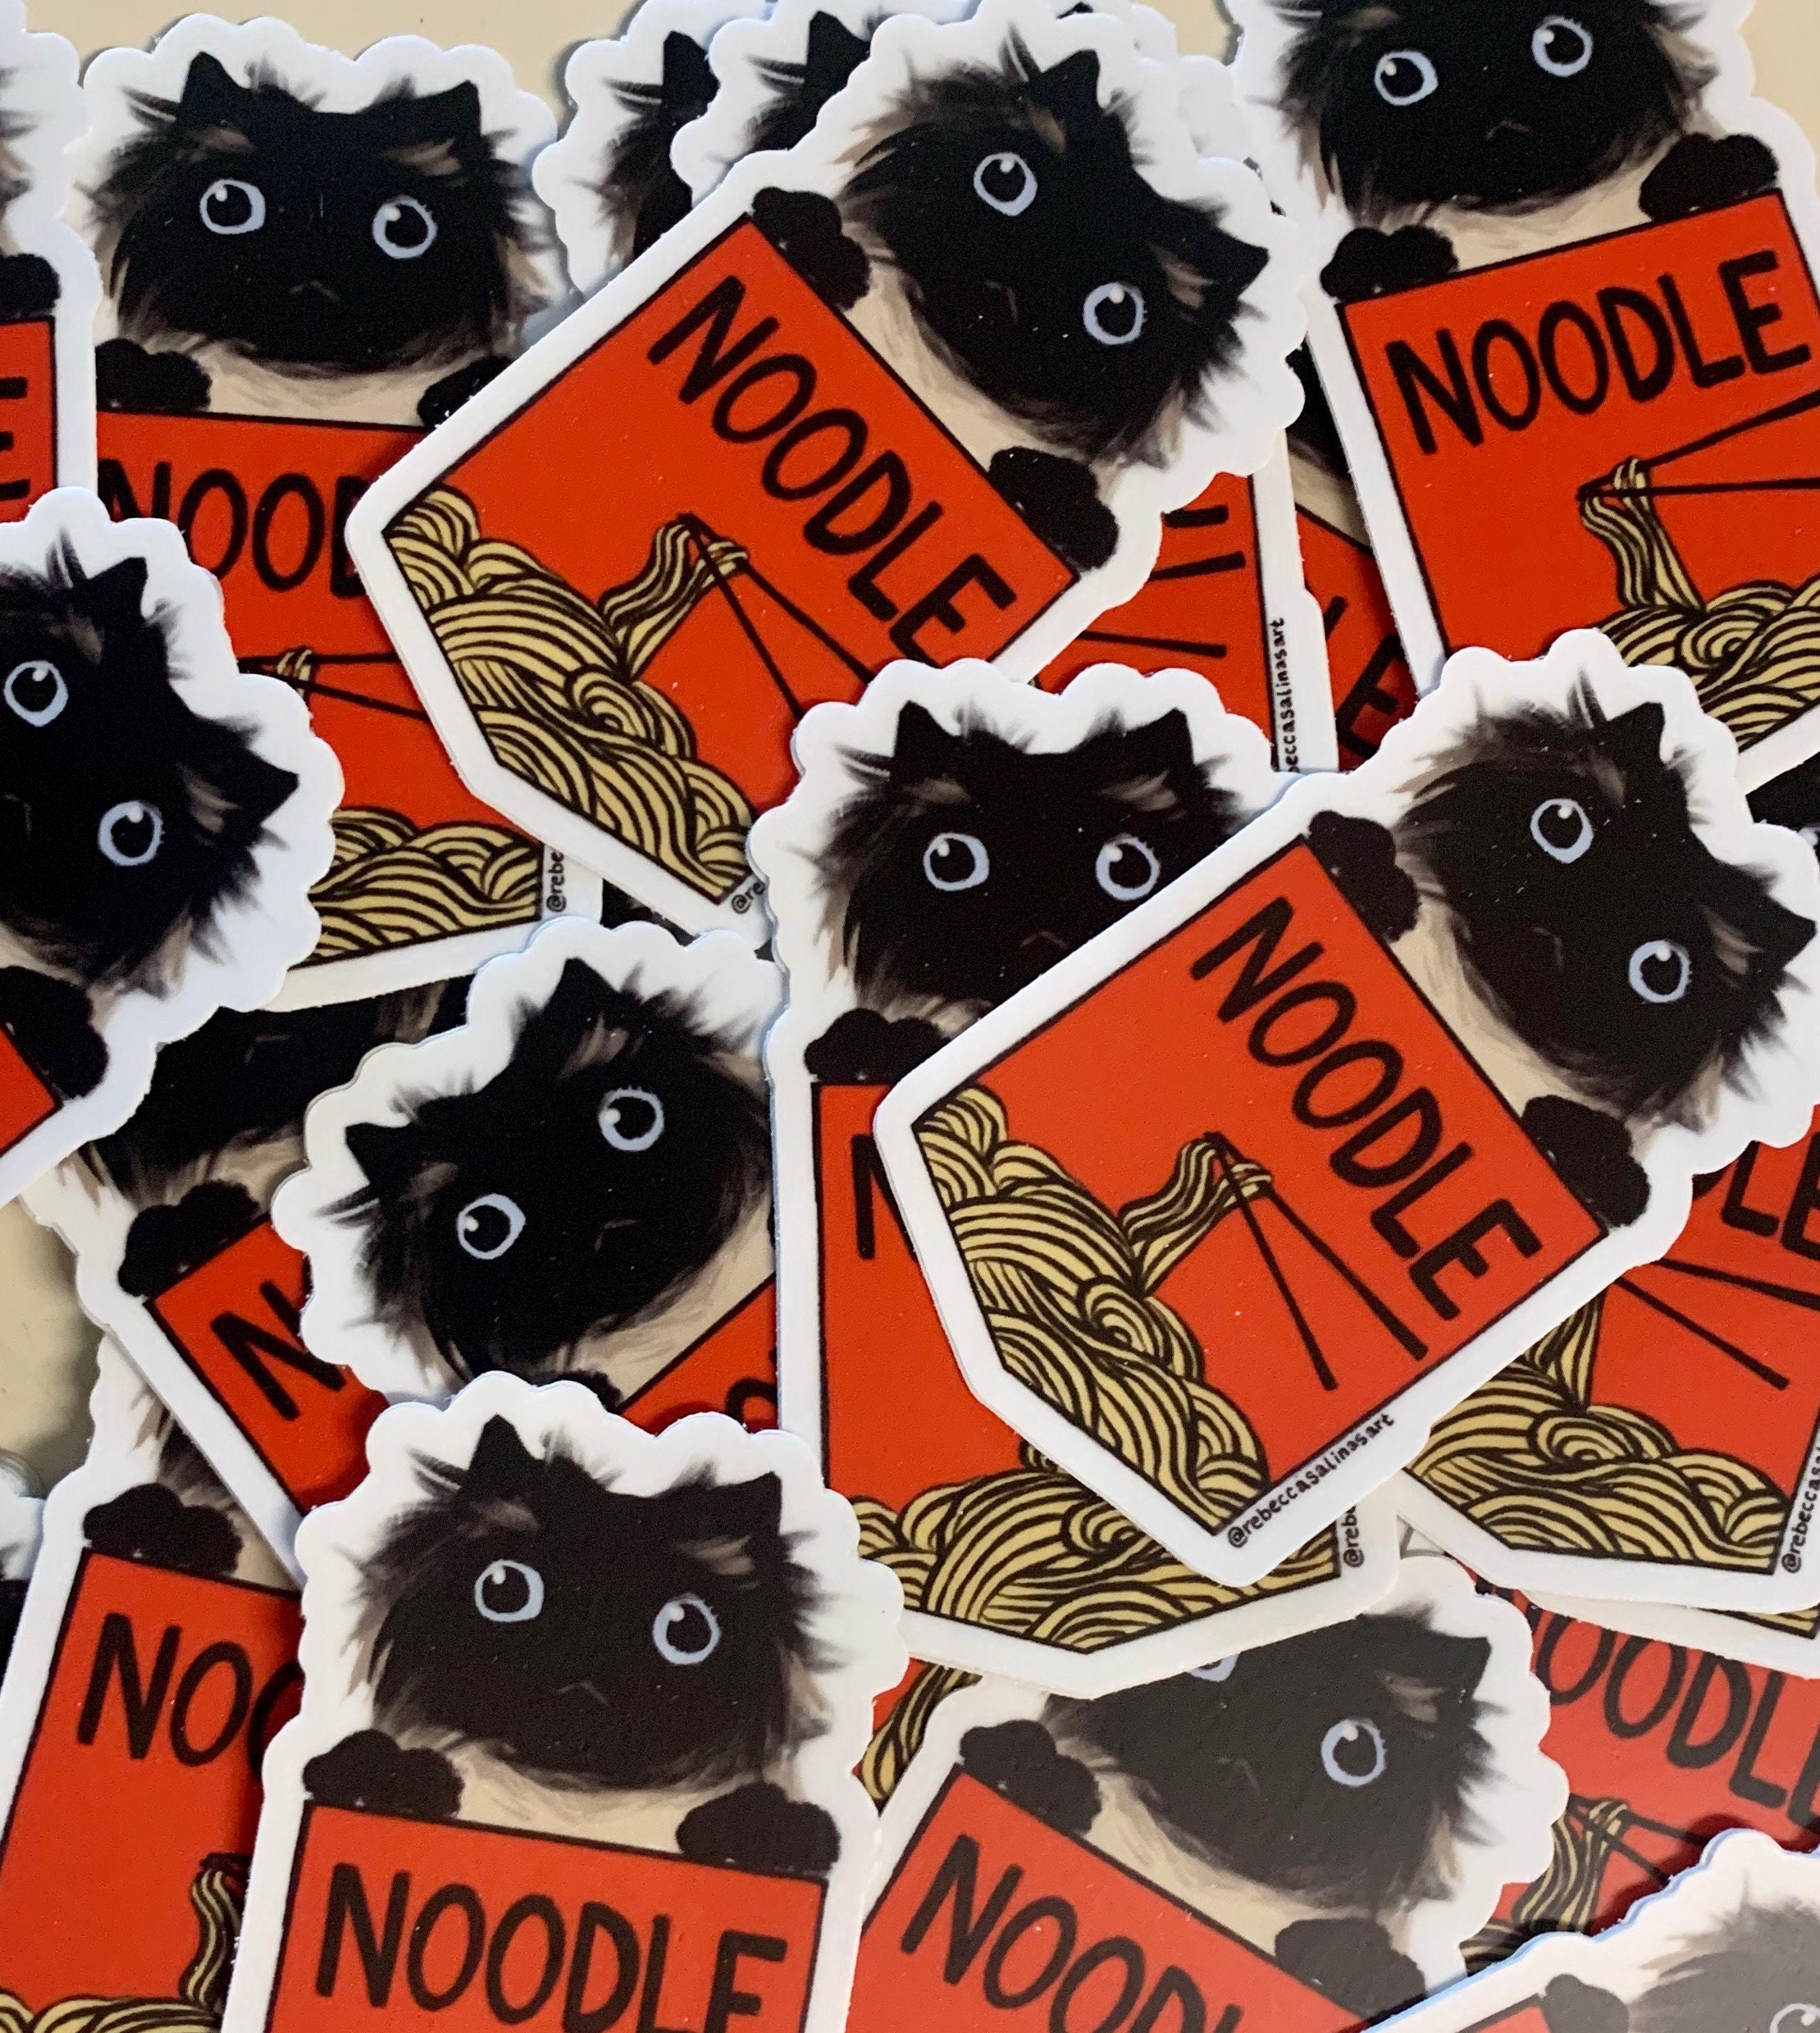 Noodle Cat Sticker, Red Ramen Cup, Noodles, Big Eyes, Existential Crisis Cat, Fluffy Chocolate Point, Friendly Noodles